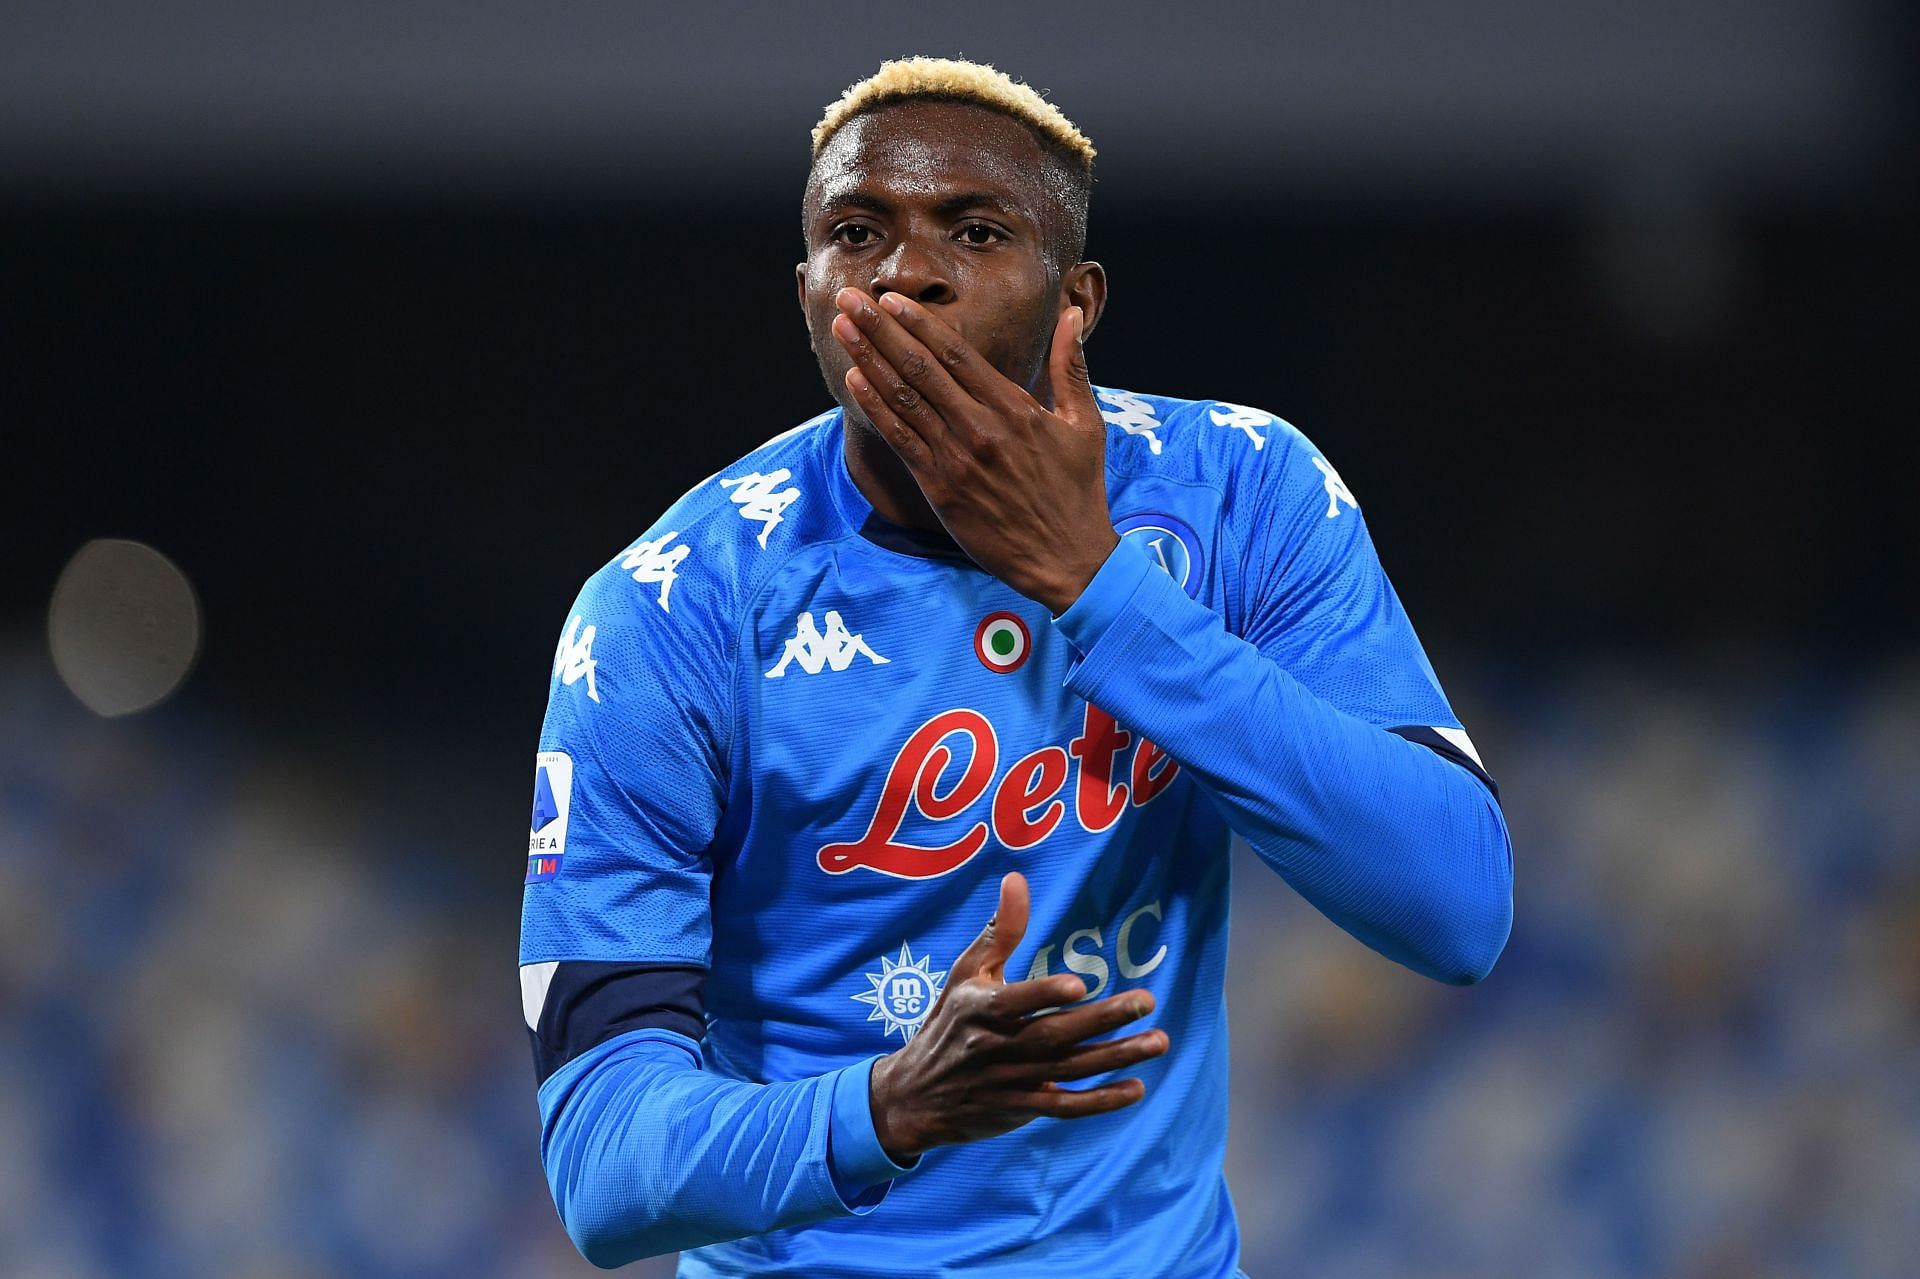 Napoli forward Victor Osimhen would be an impressive signing for Arsenal.